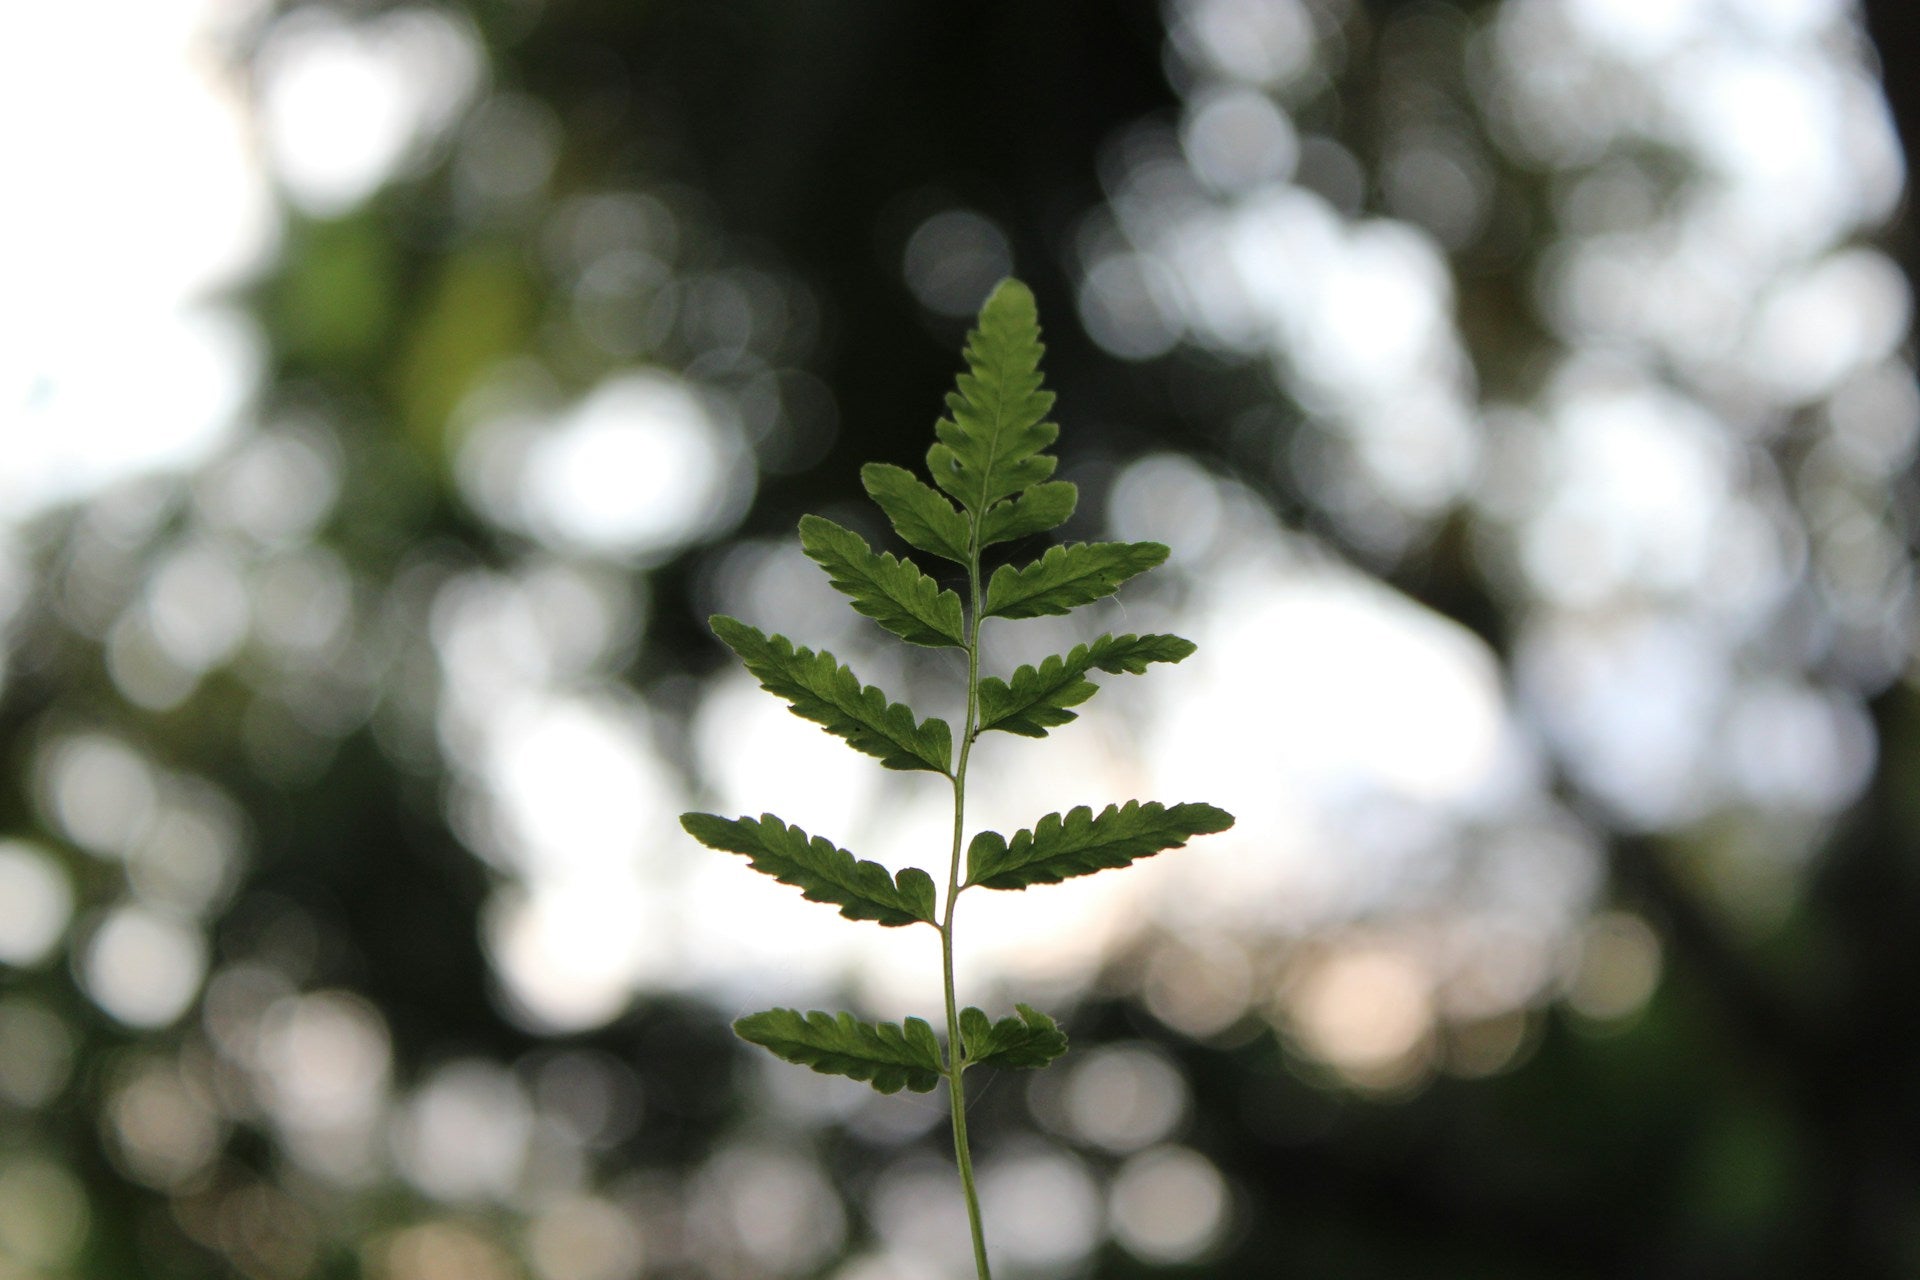 A leafy branch against the backdrop of a canopy.